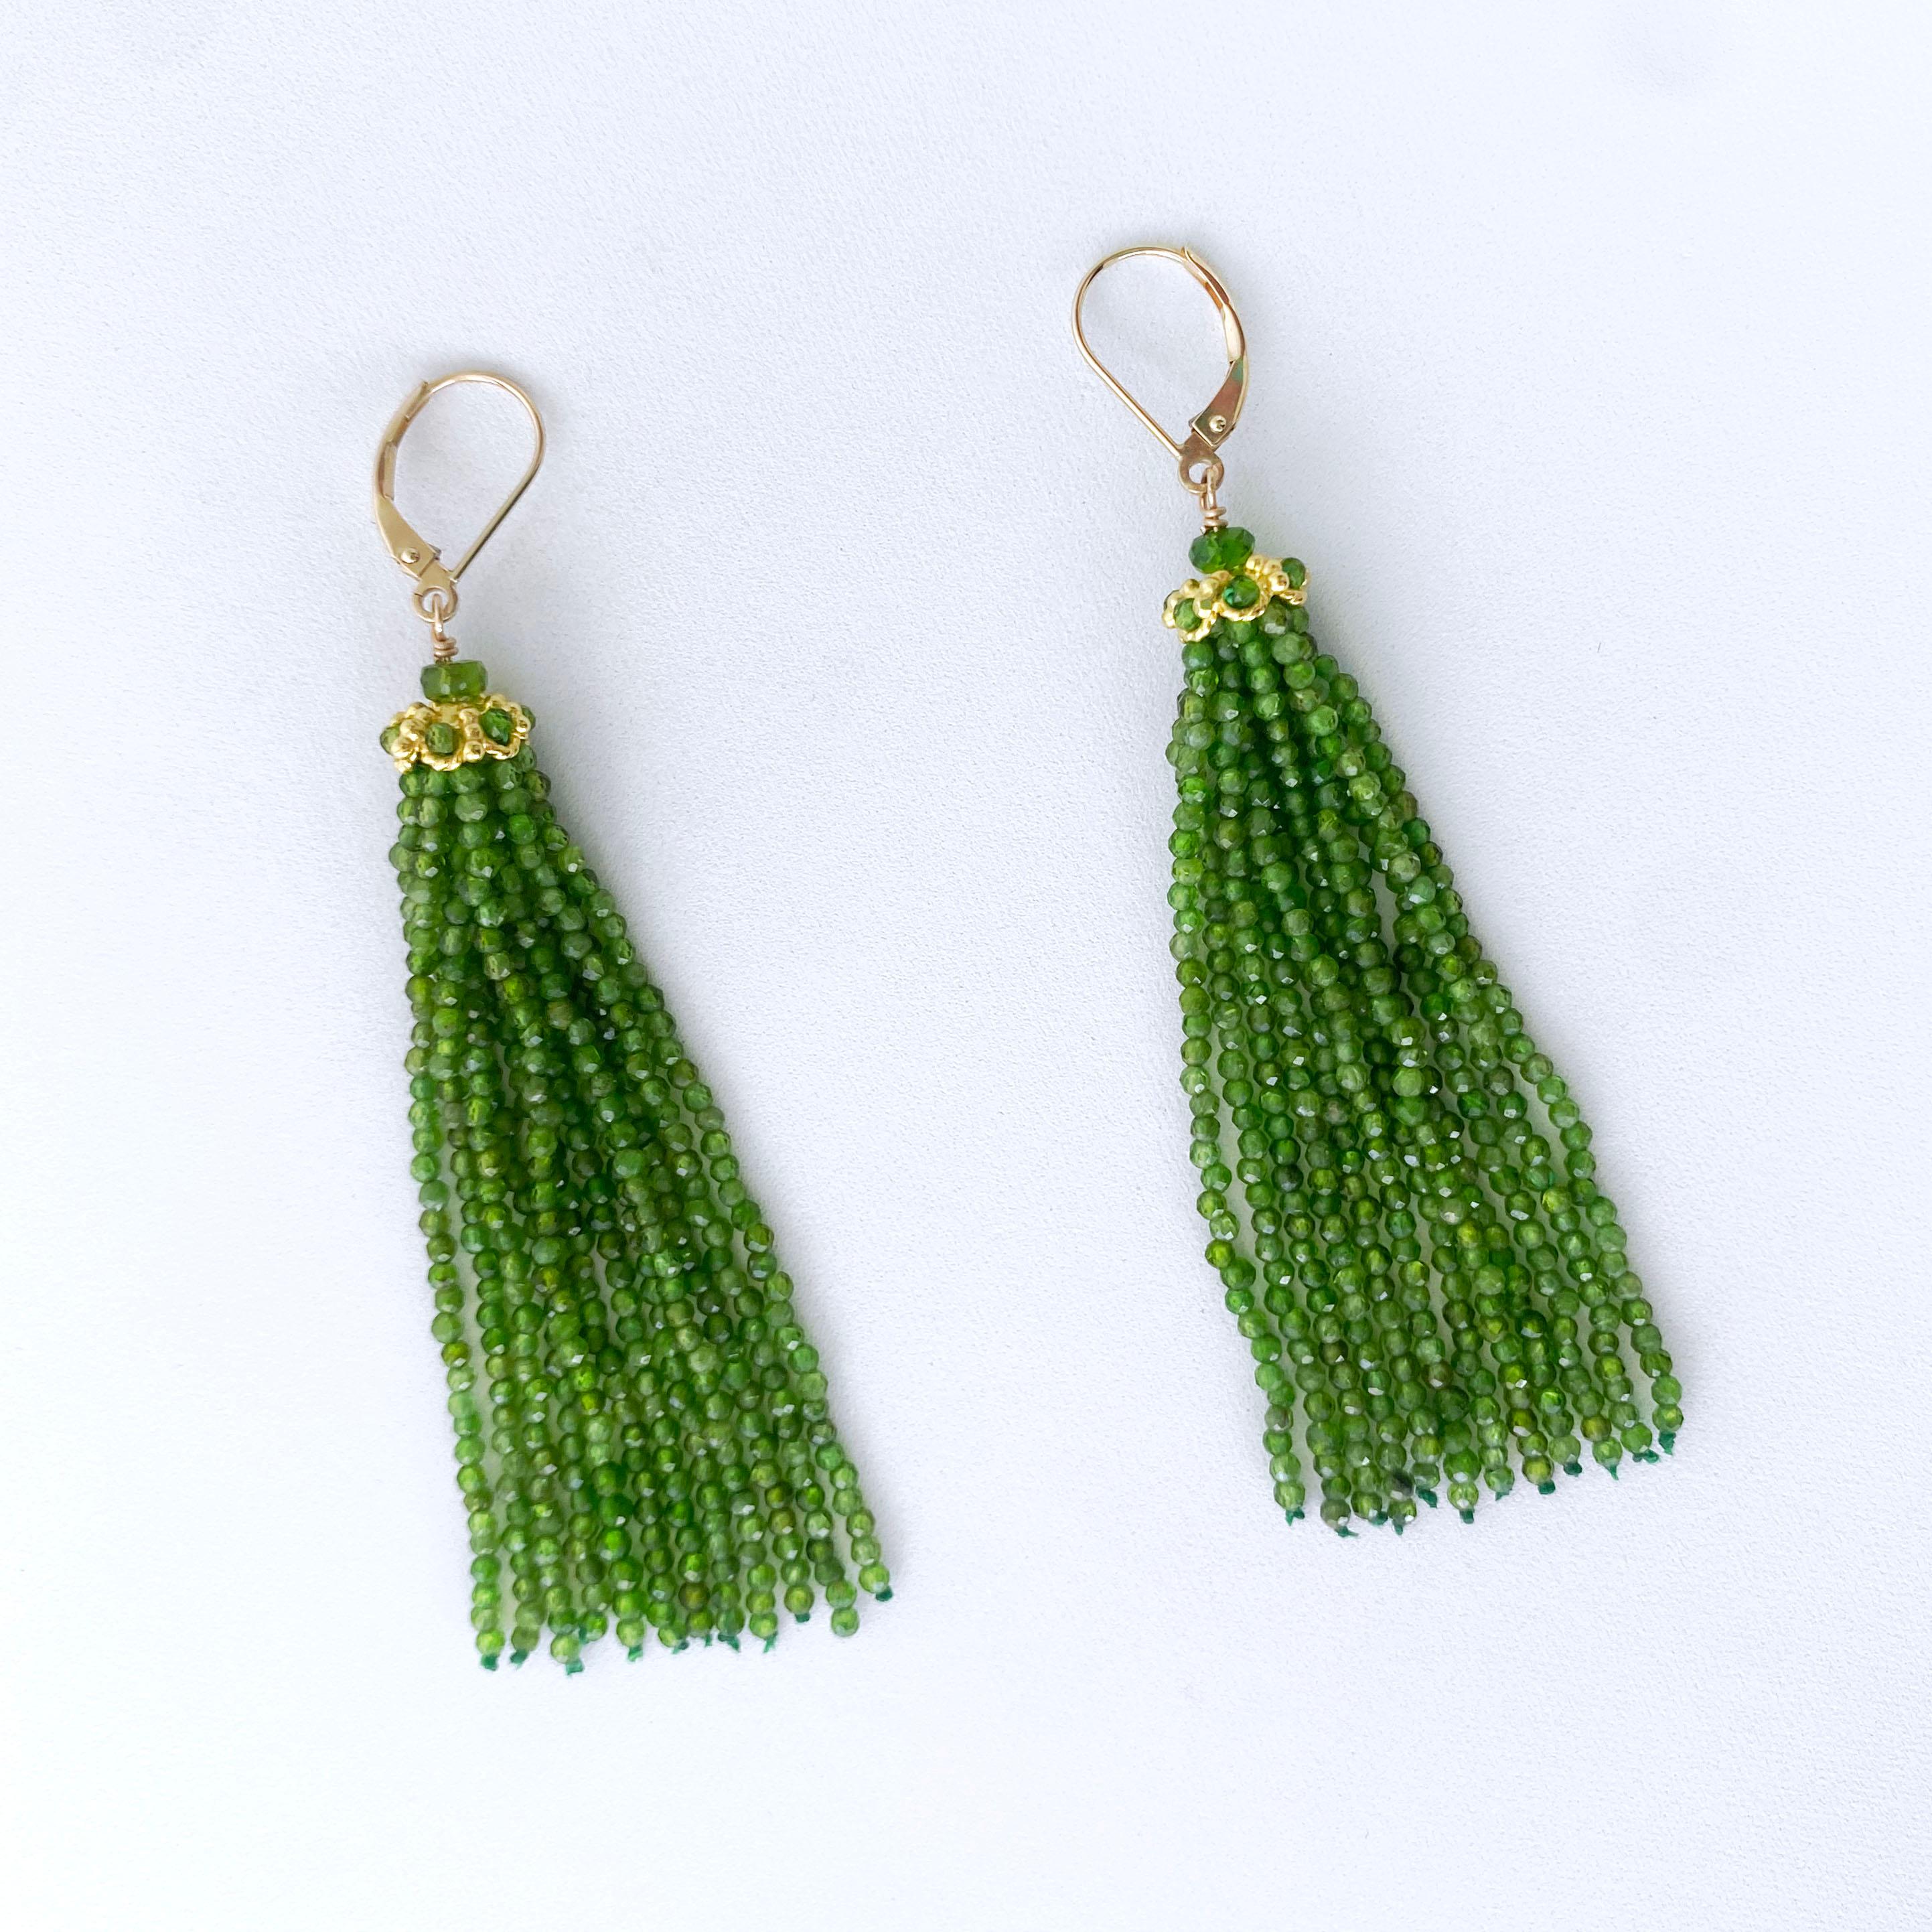 Pair of Tassel Earrings by Marina J. This pair is made with all Faceted Chrome Diopside and solid 14k Yellow Gold. The Chrome Diopside display a vibrant Green color that radiates stunning hues due to the stone's semi translucency. Measuring 3.25